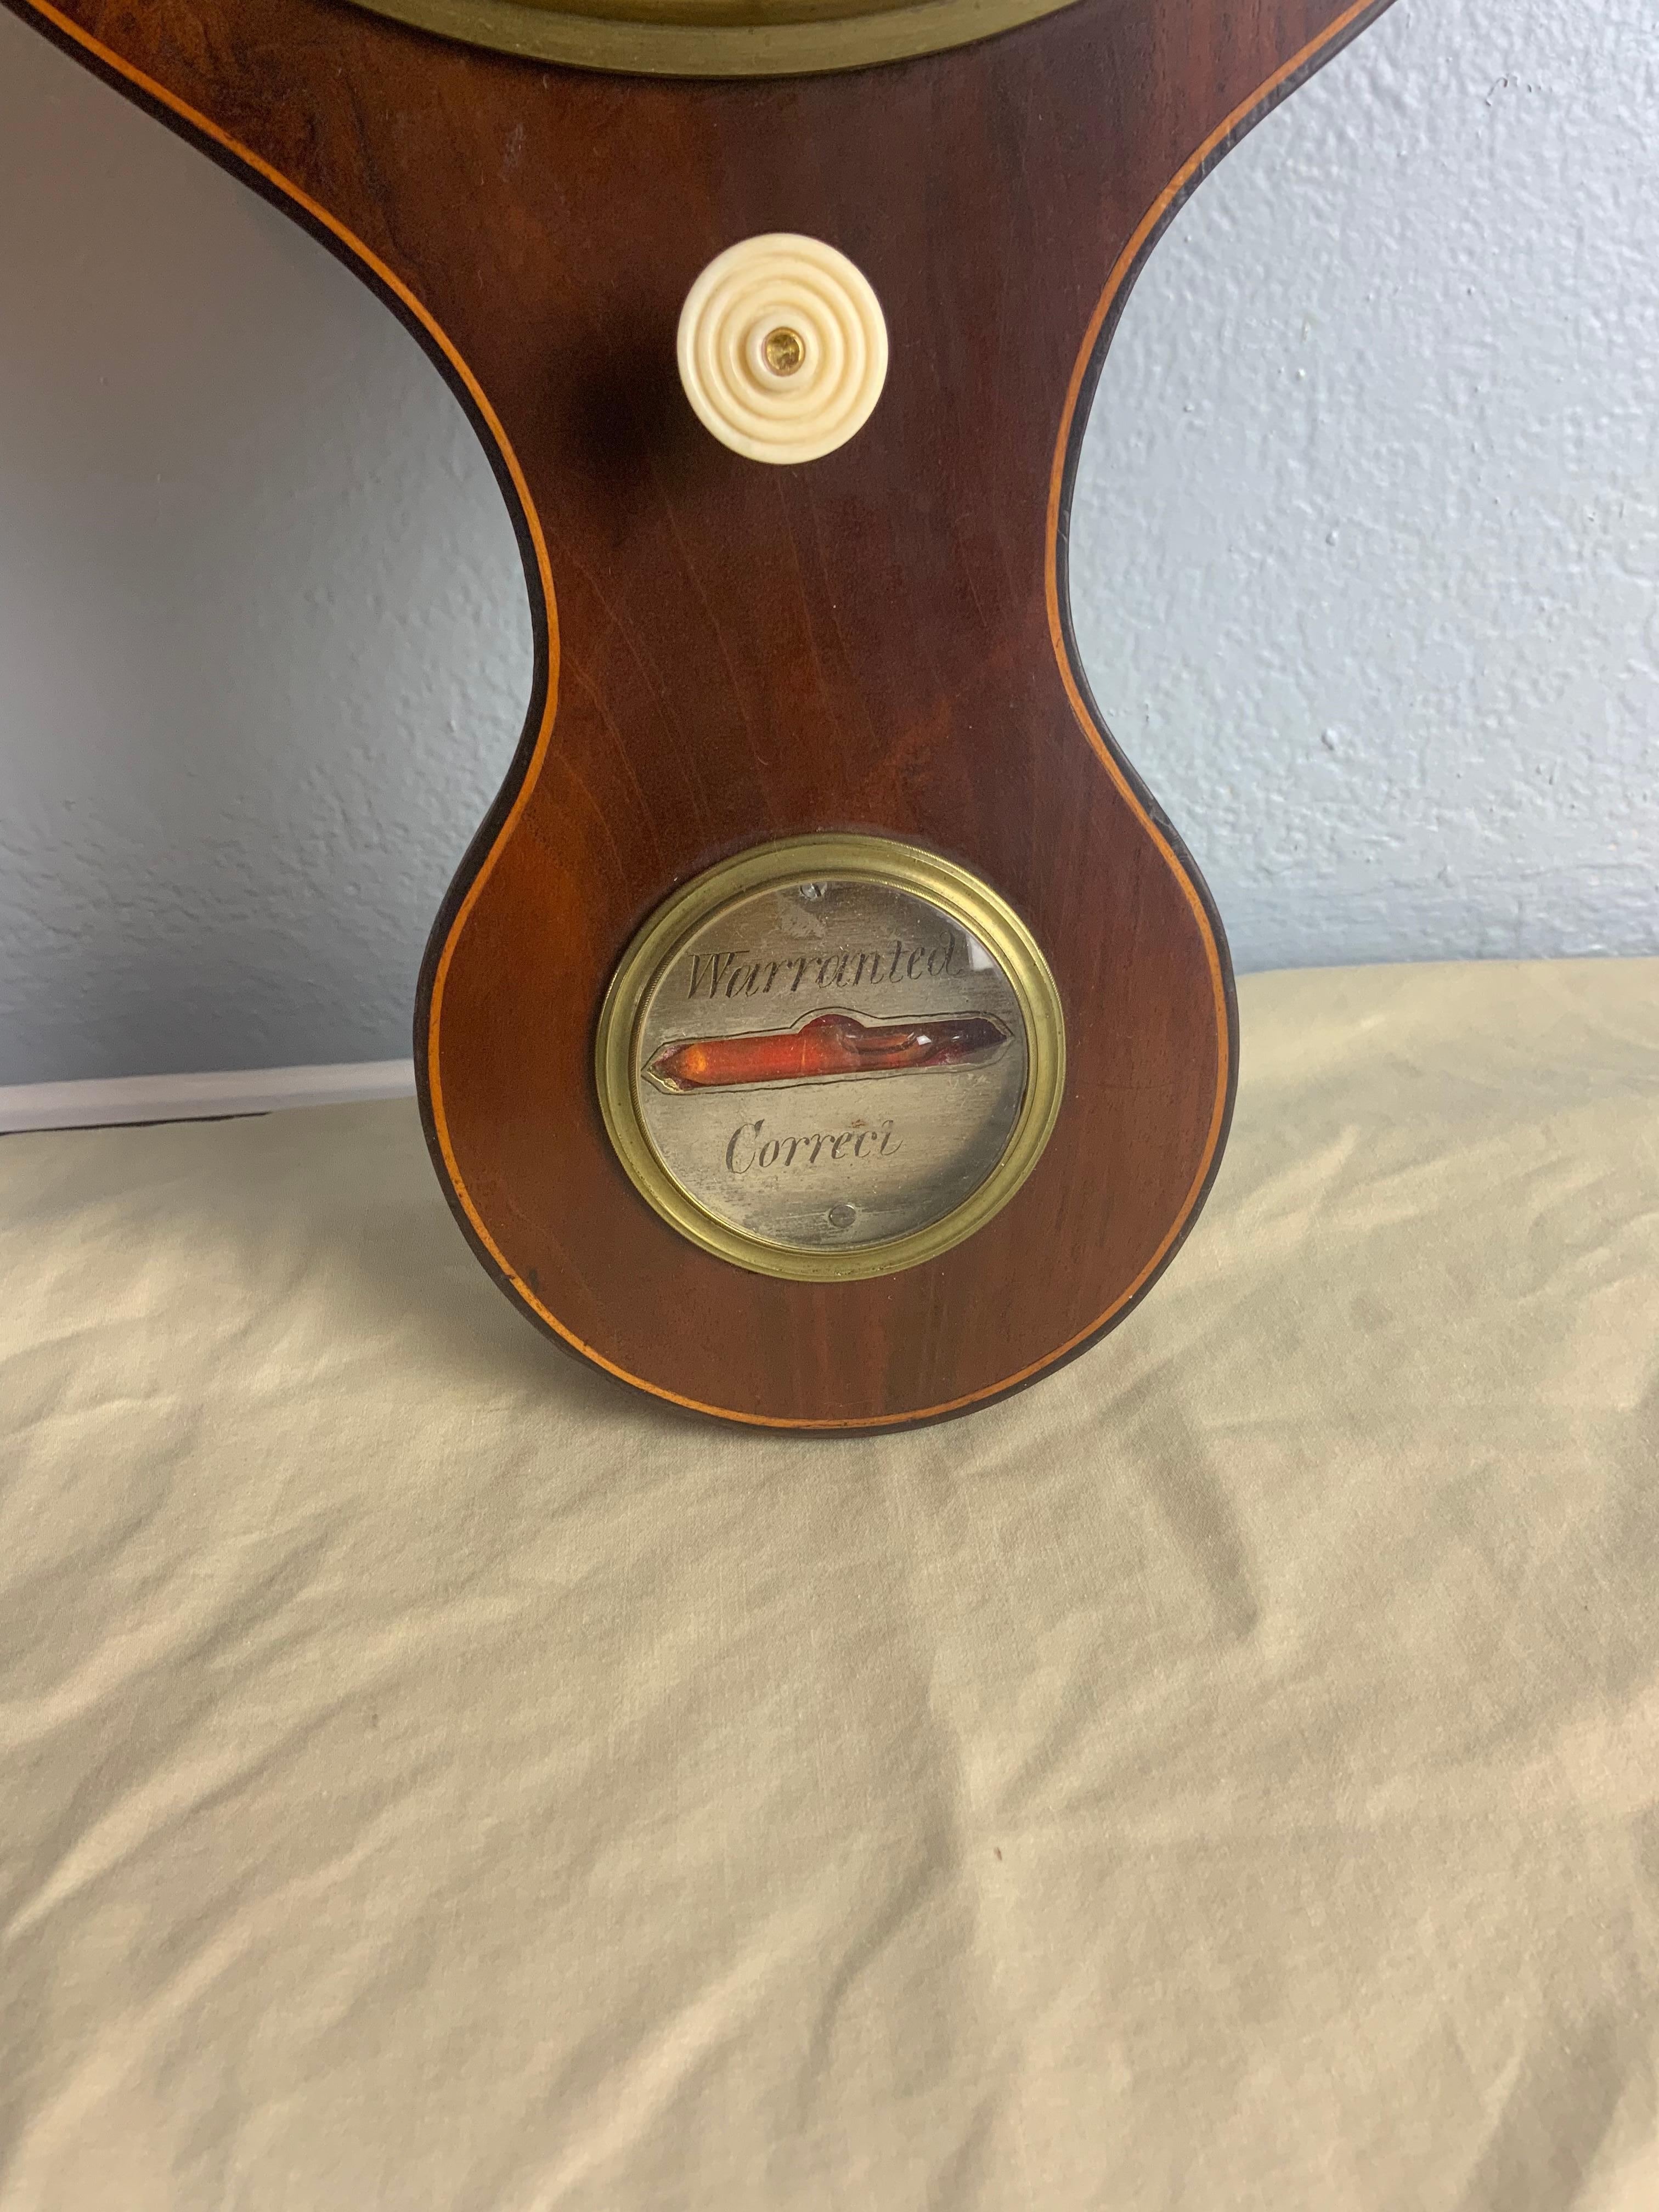 A very nice Mid-19th Century mahogany georgian wheel barometer with decorative Ebony and Holly string inlay around the outer edges of the case. Sold as is because some of the small internal pieces are missing for the Mercury tubes. The case is in